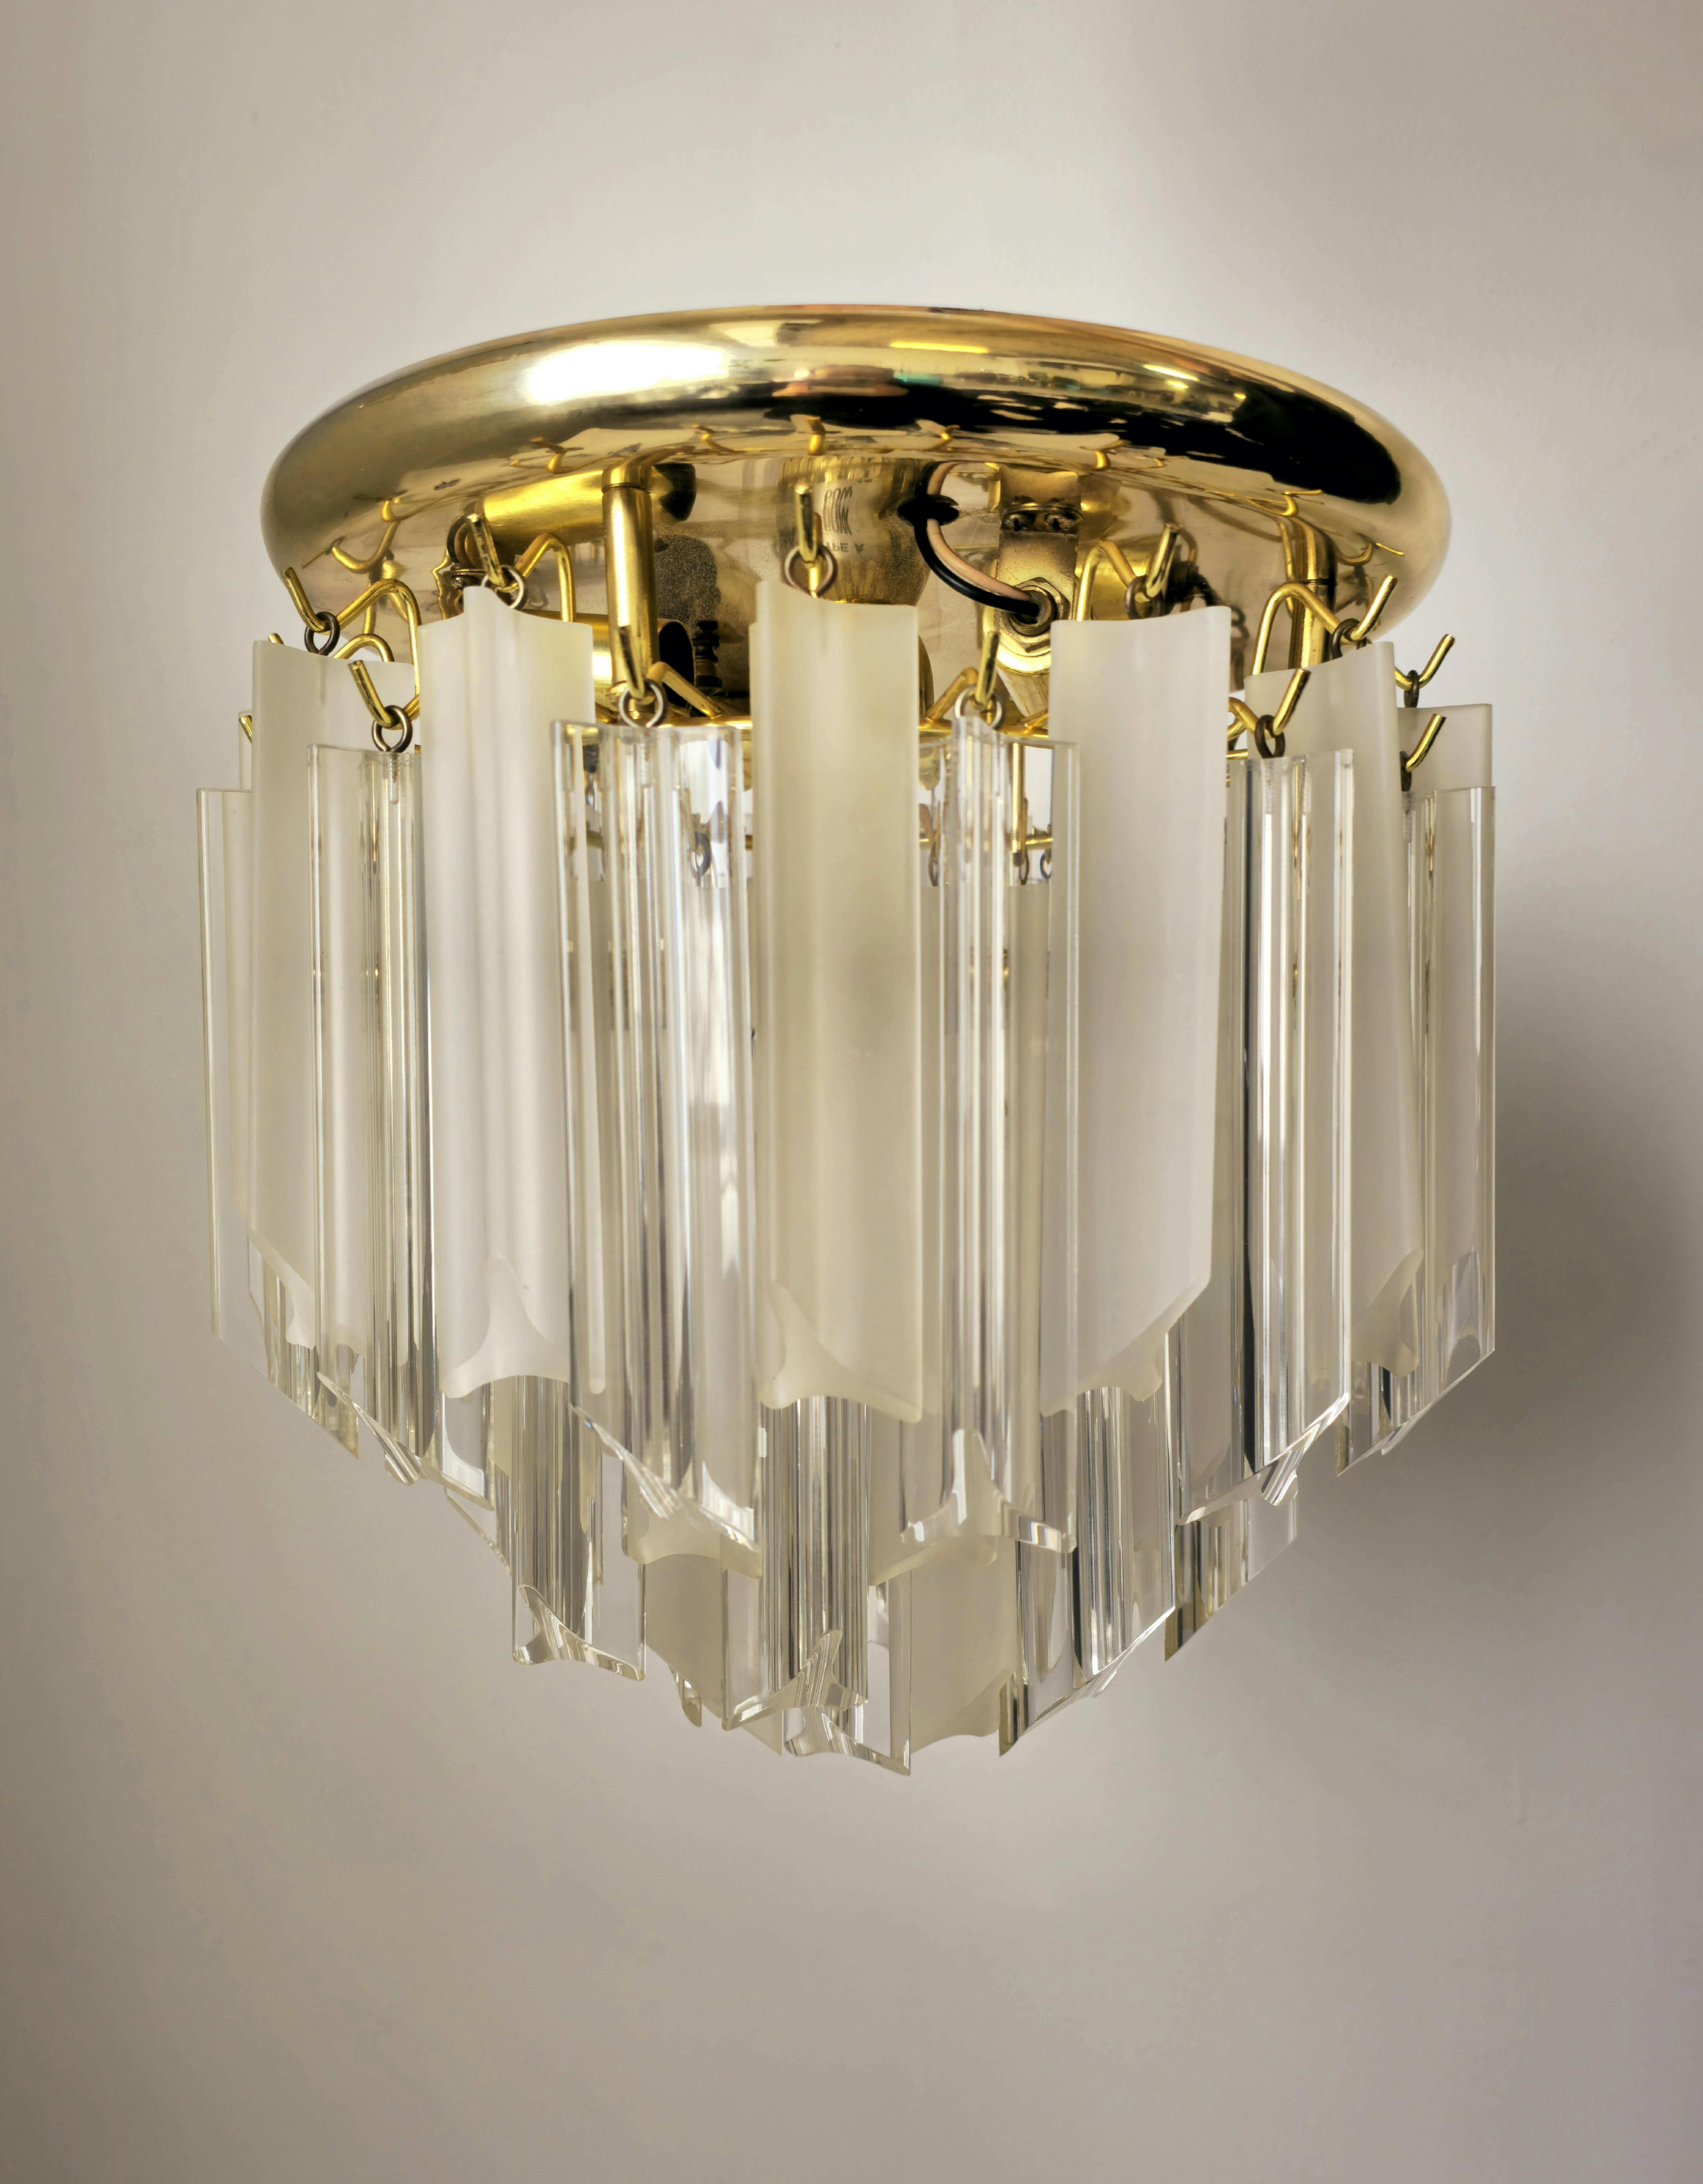 Stunning chandelier with brass base and lucite. This chandelier features clear and frosted lucite. There are 53 pieces of lucite in total. The brass base has hooks to place each piece in and the hooks are presented in rows which are tiered. Each